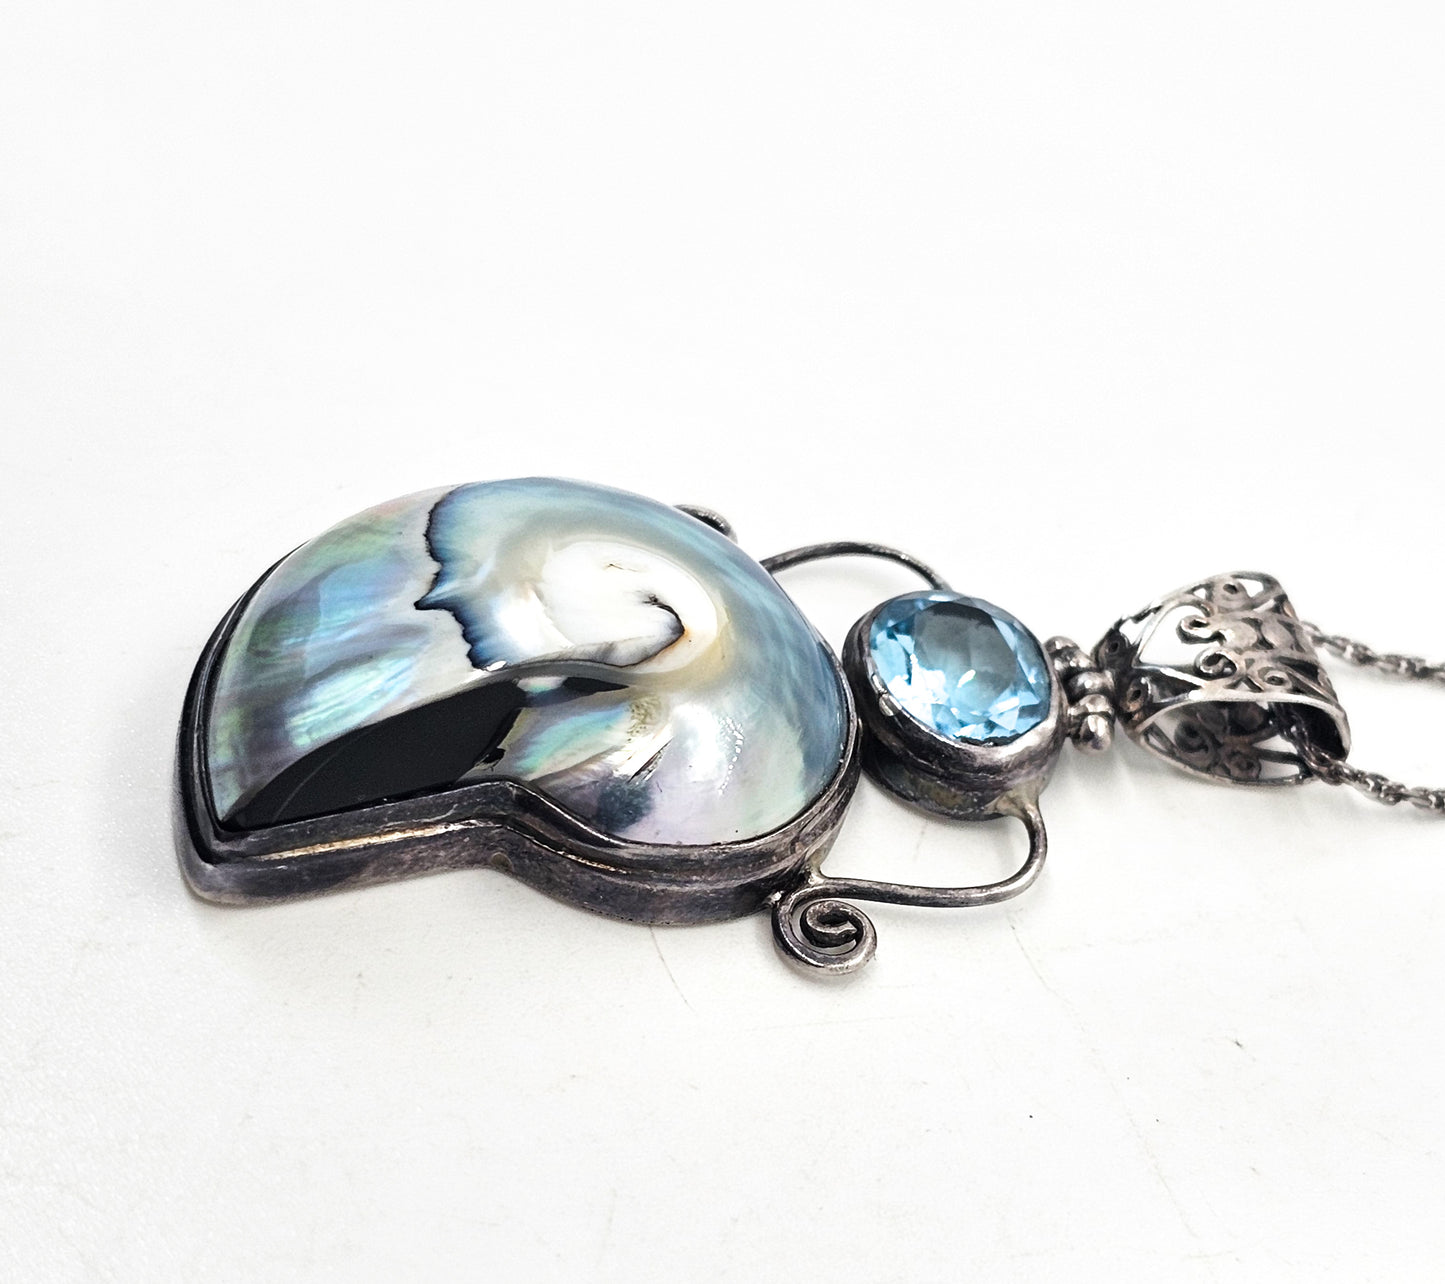 Mermaid treasure Blue topaz and opalescent shell sterling silver pendant necklace